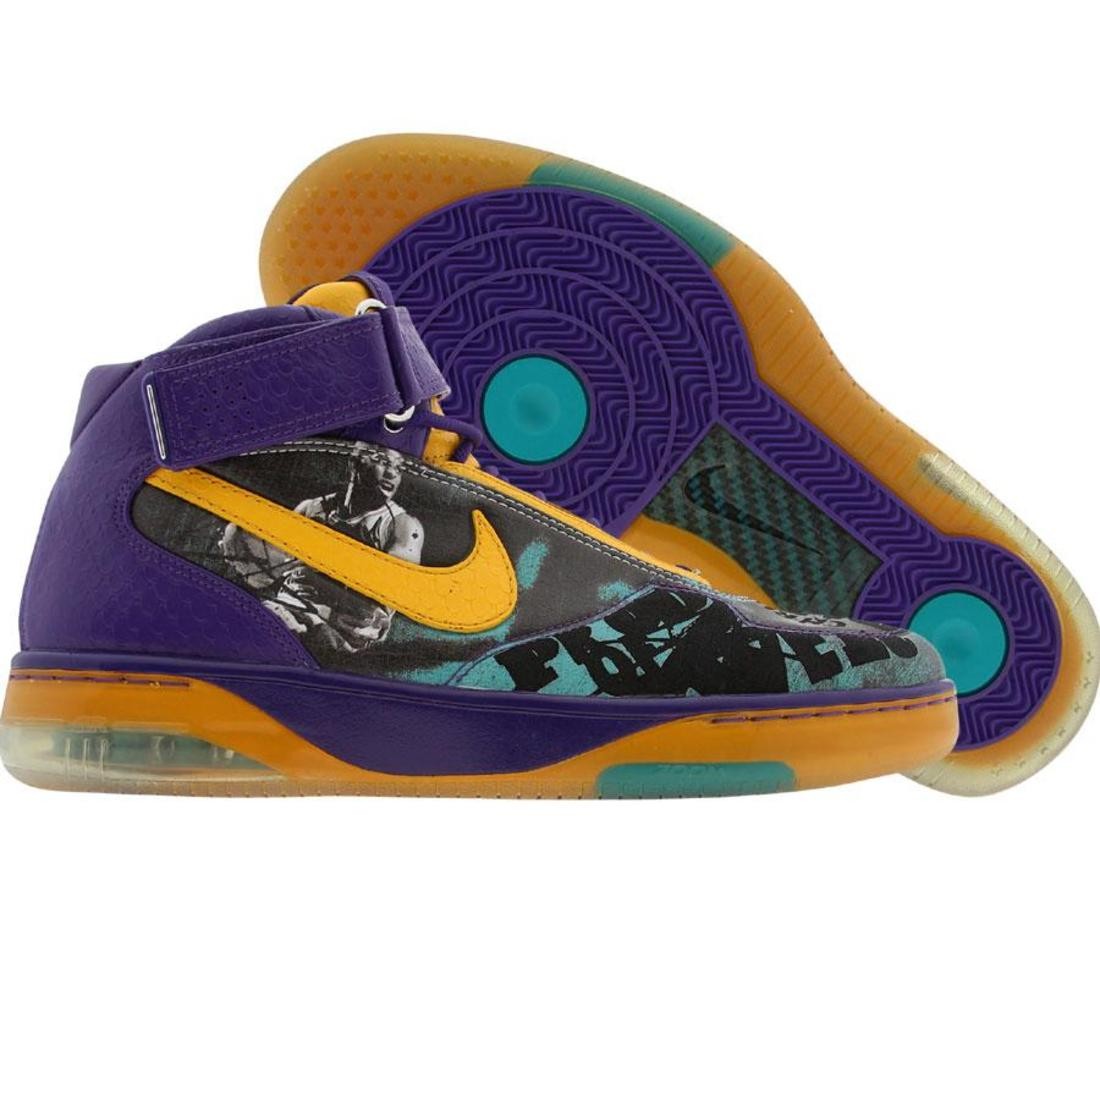 Nike Air Force 25 6 Pack 2007 NBA All Star Release - Chris Paul Edition (energy / del sol / crt purple)